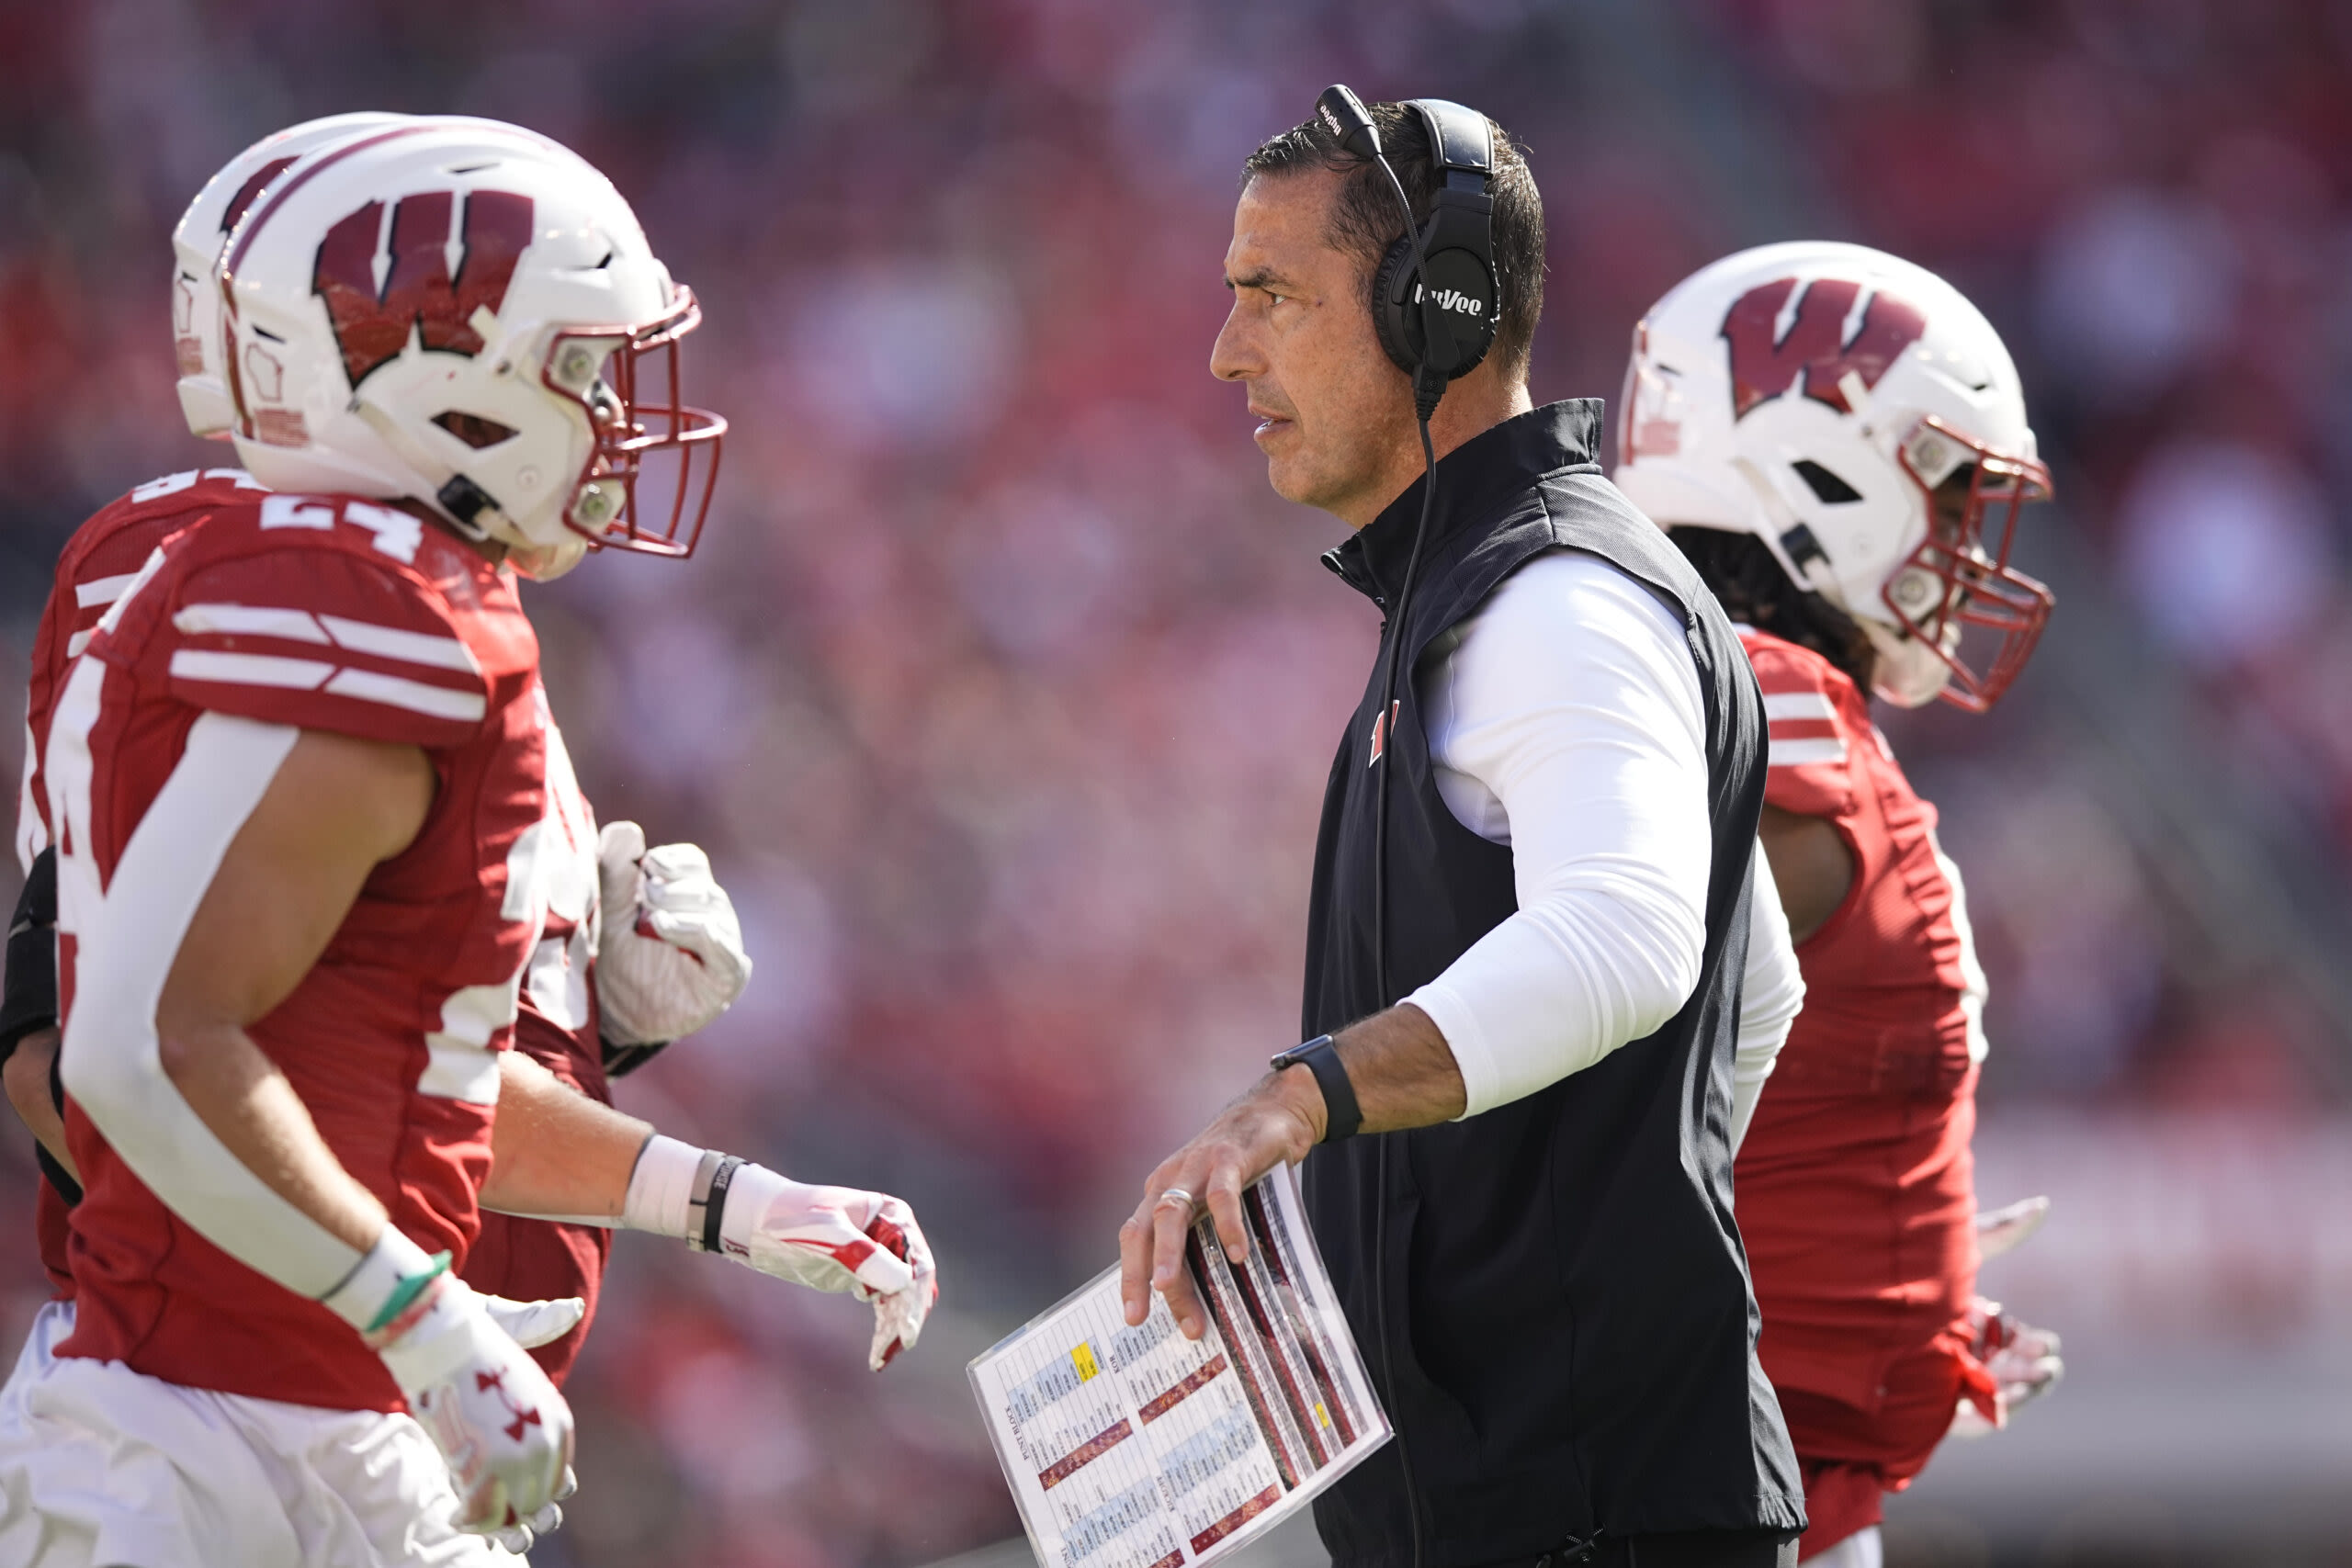 Former Wisconsin defensive lineman transfer commits to Liberty